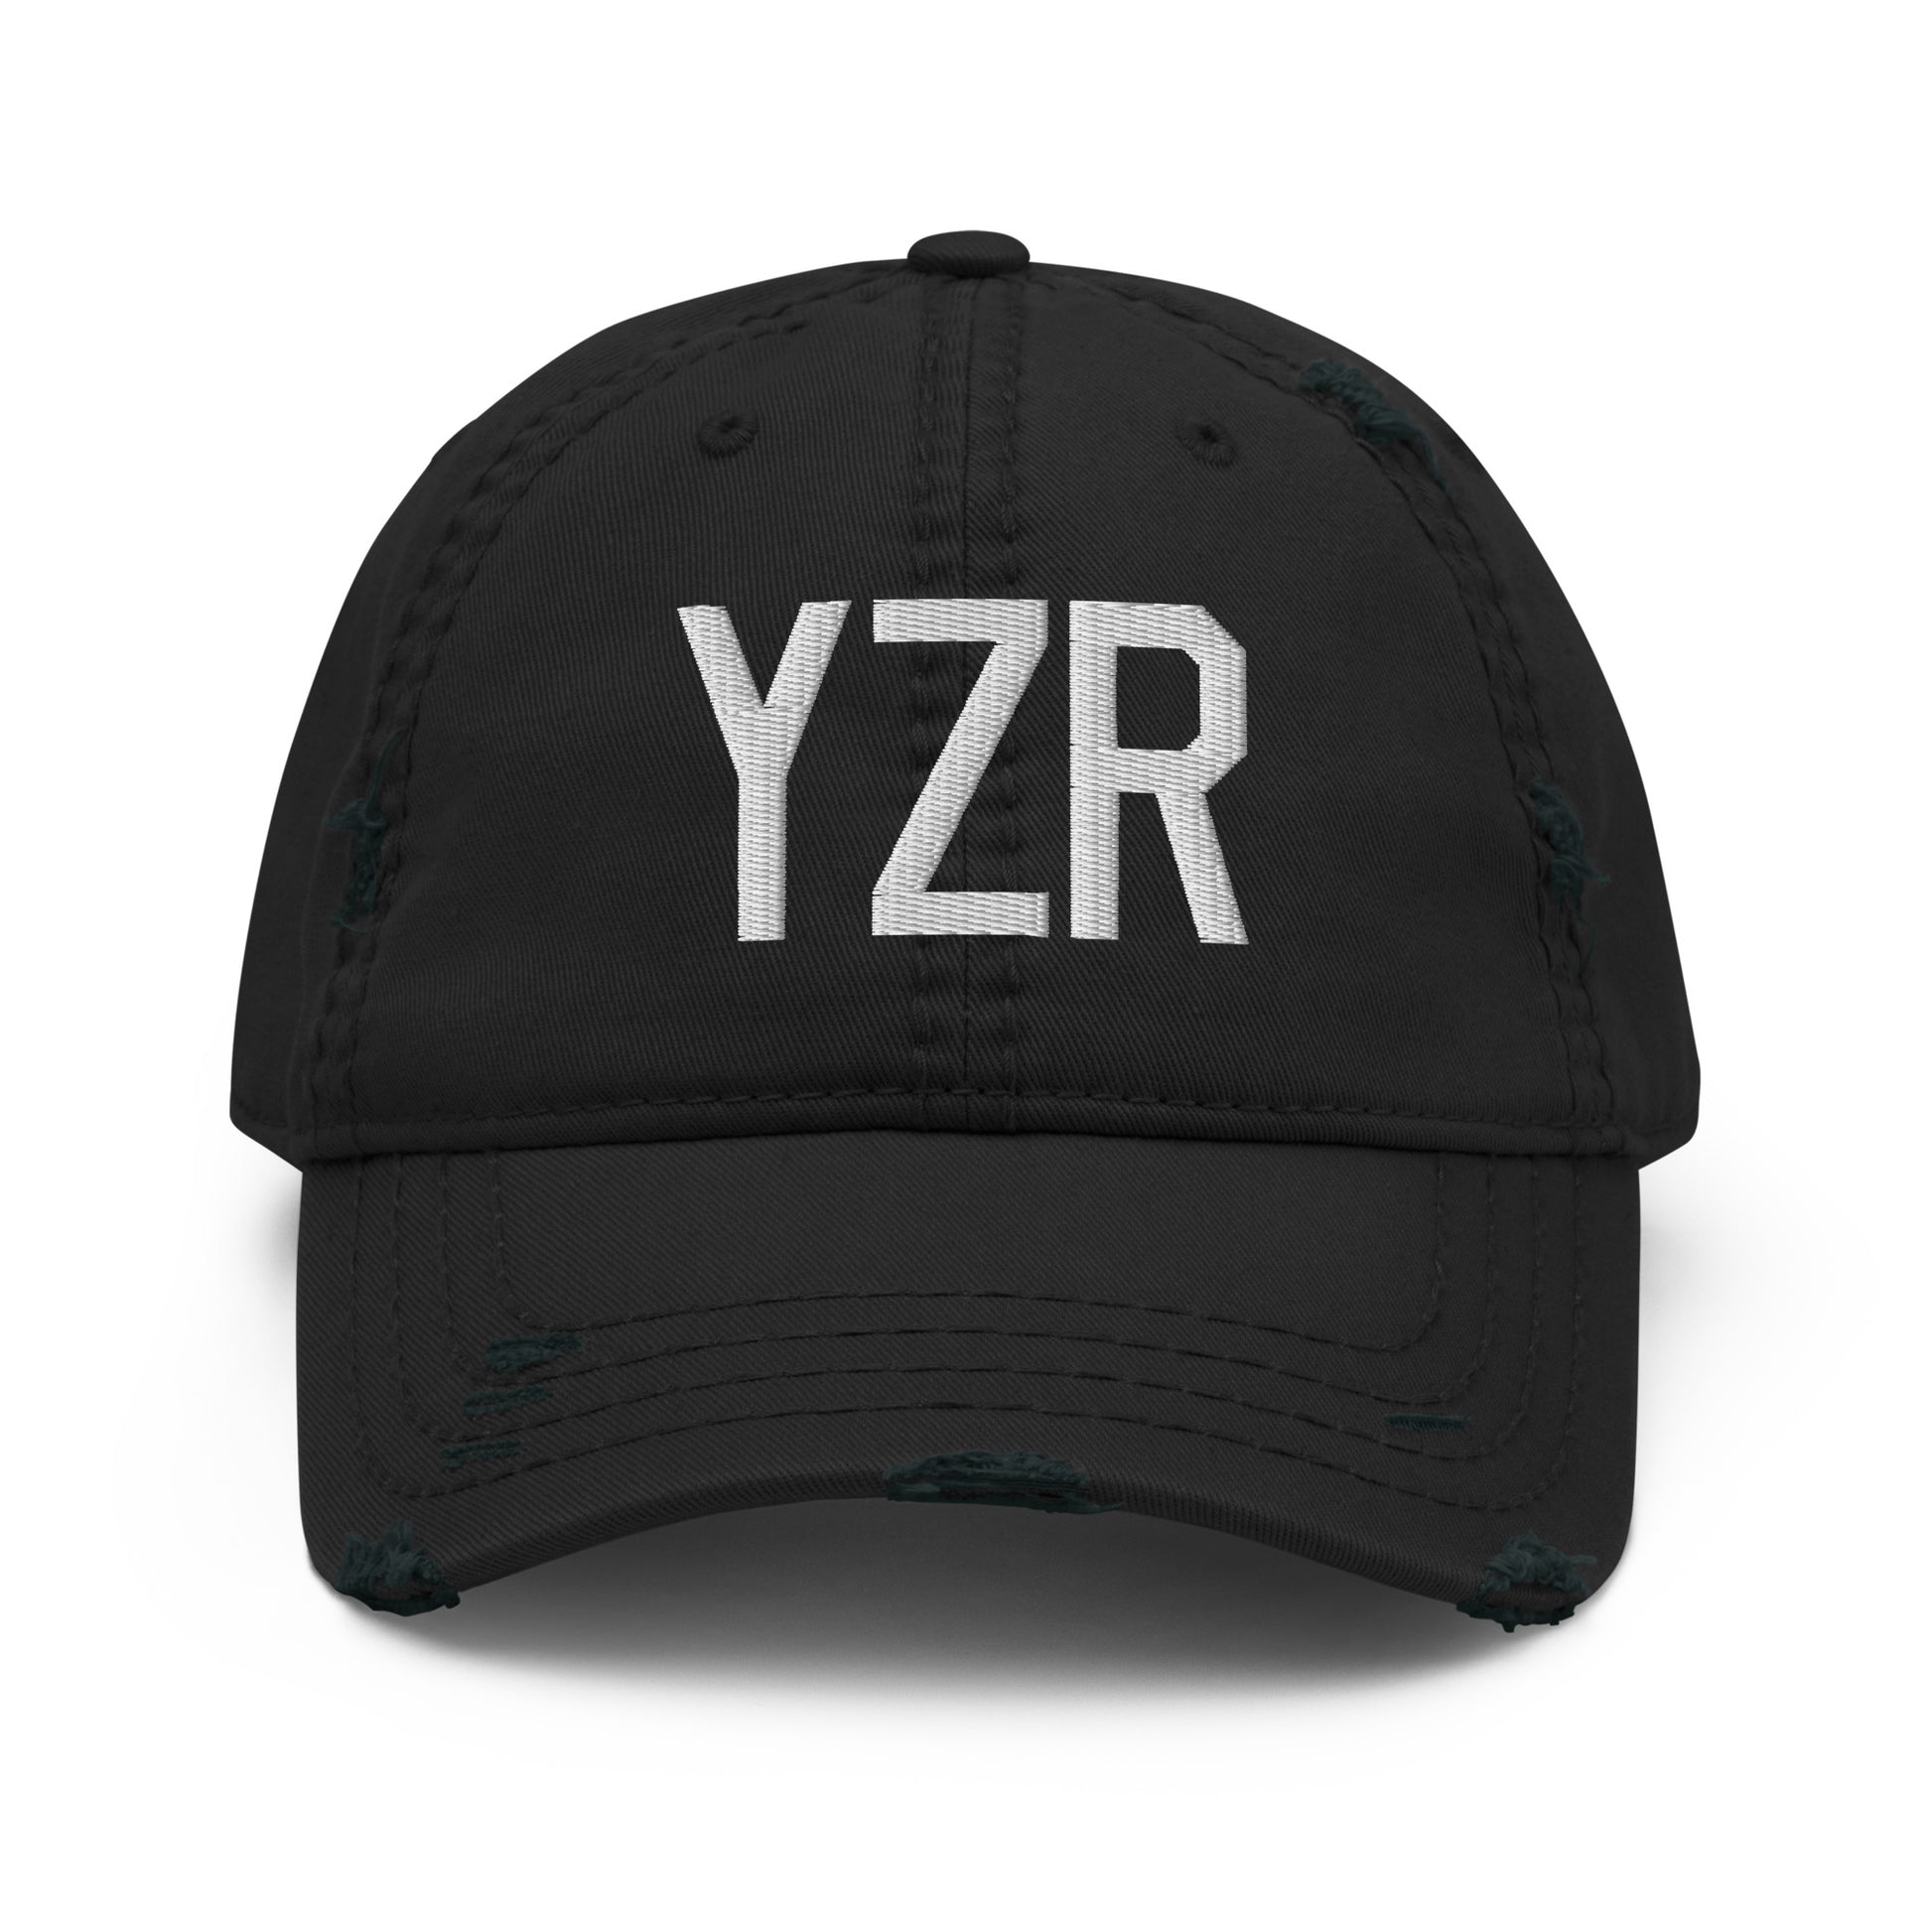 Airport Code Distressed Hat - White • YZR Sarnia • YHM Designs - Image 10